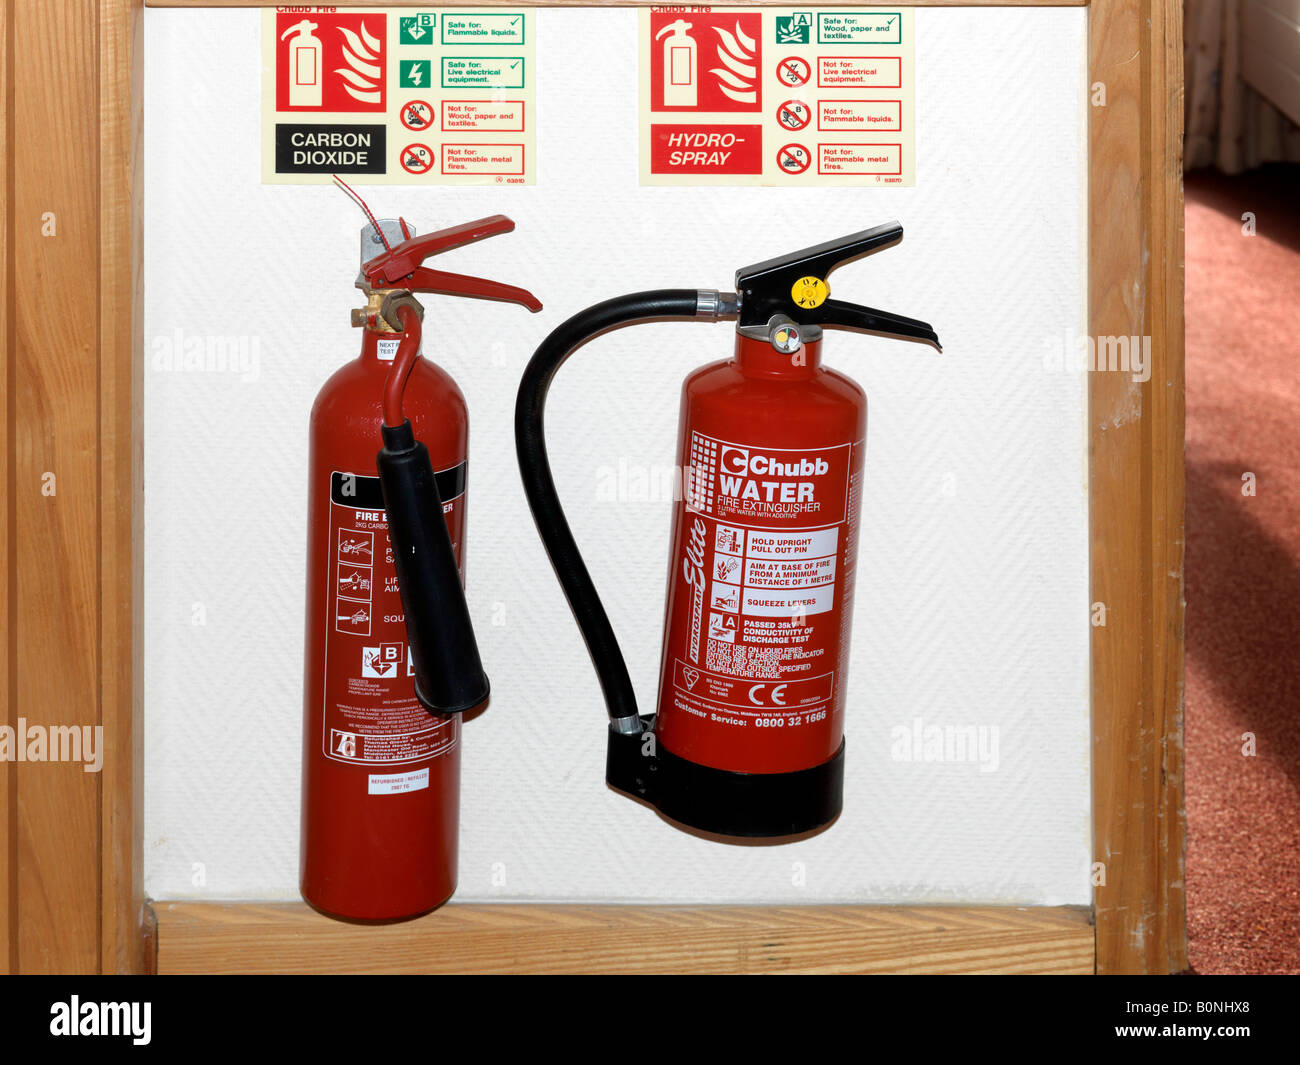 Fire Extinguishers Carbon Dioxide and Hydro Spray Stock Photo